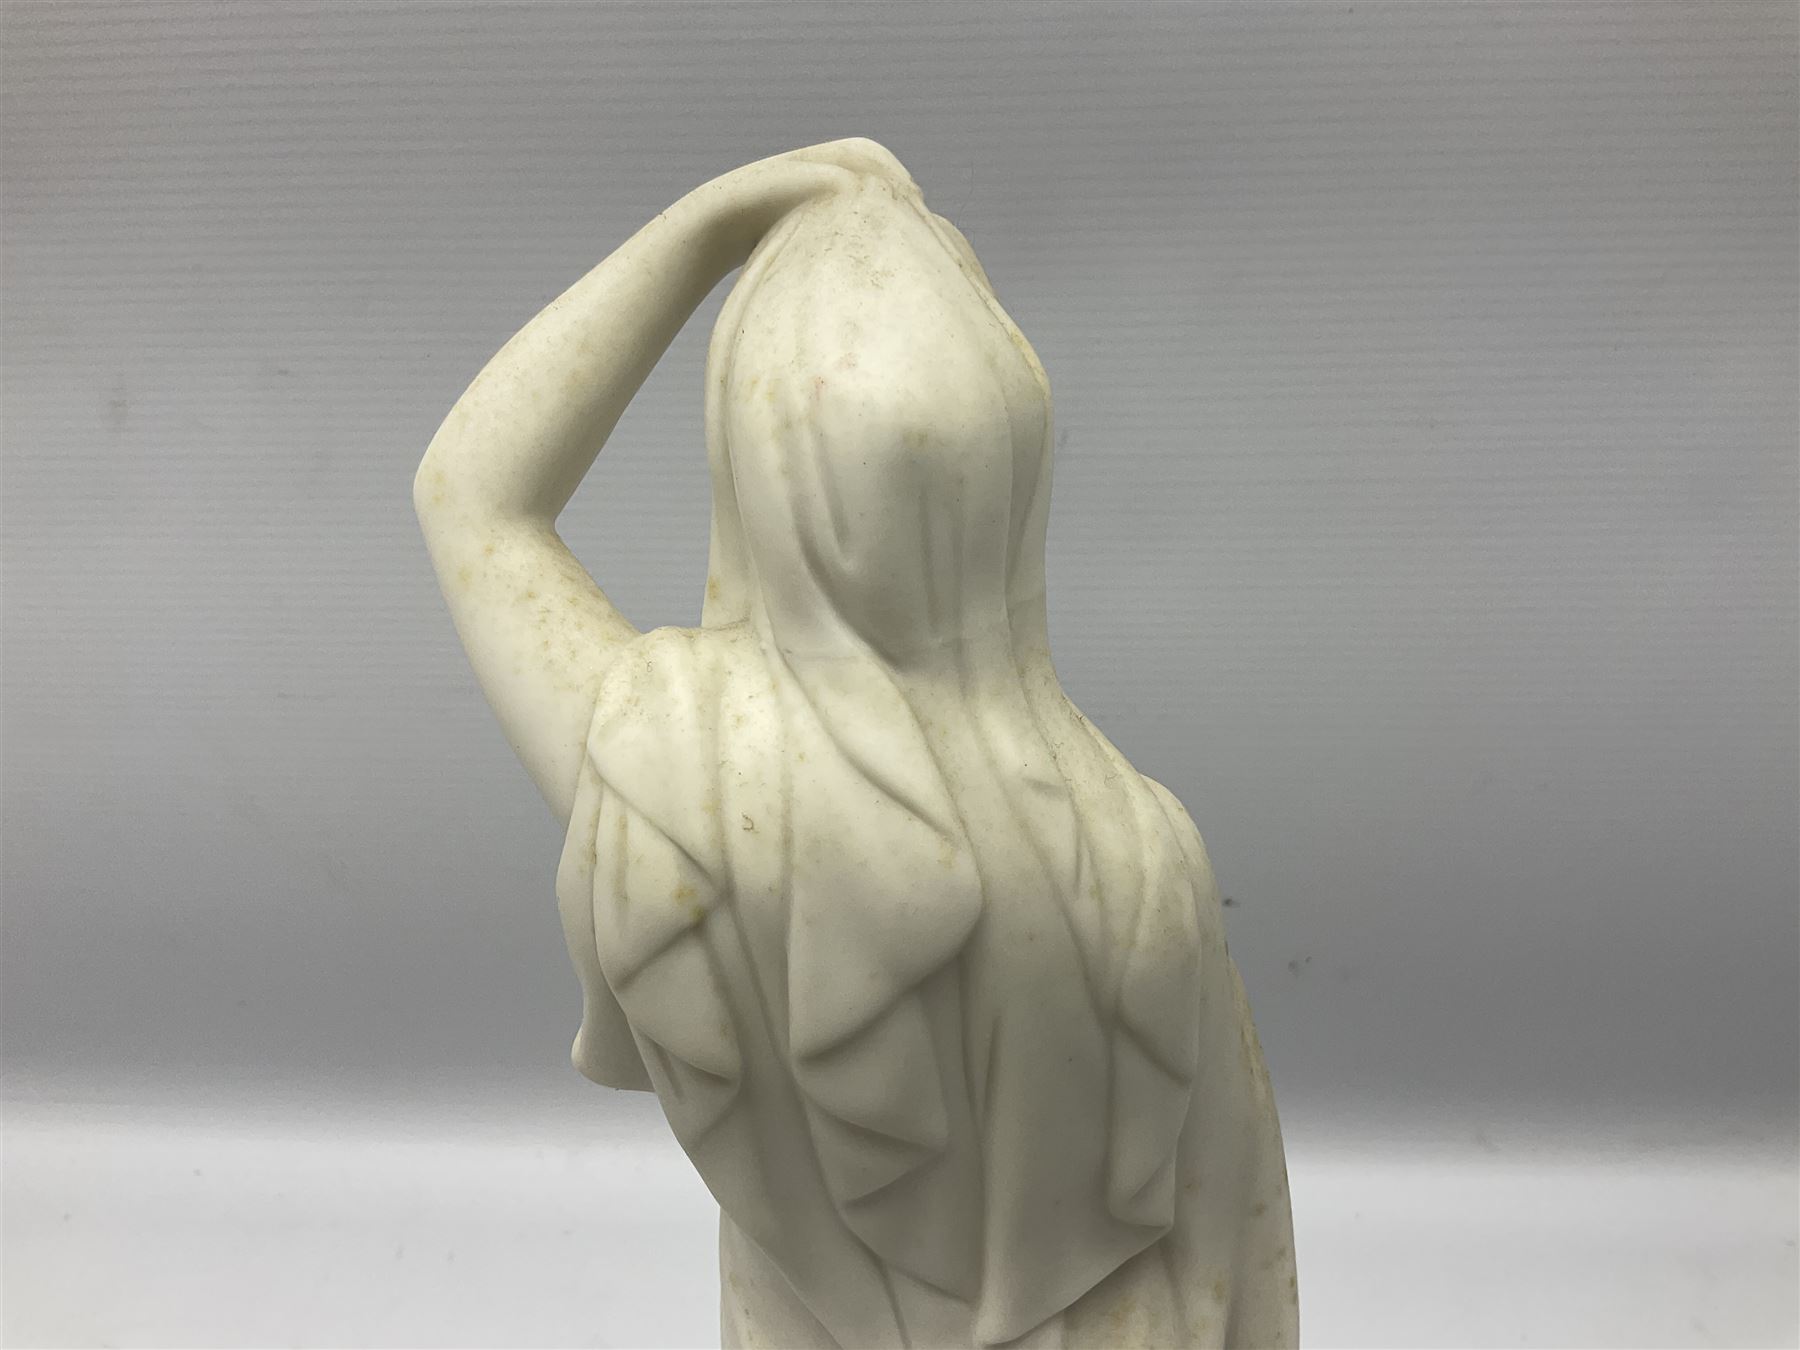 Parian ware figure of a woman in classical dress with one hand raised - Image 5 of 8